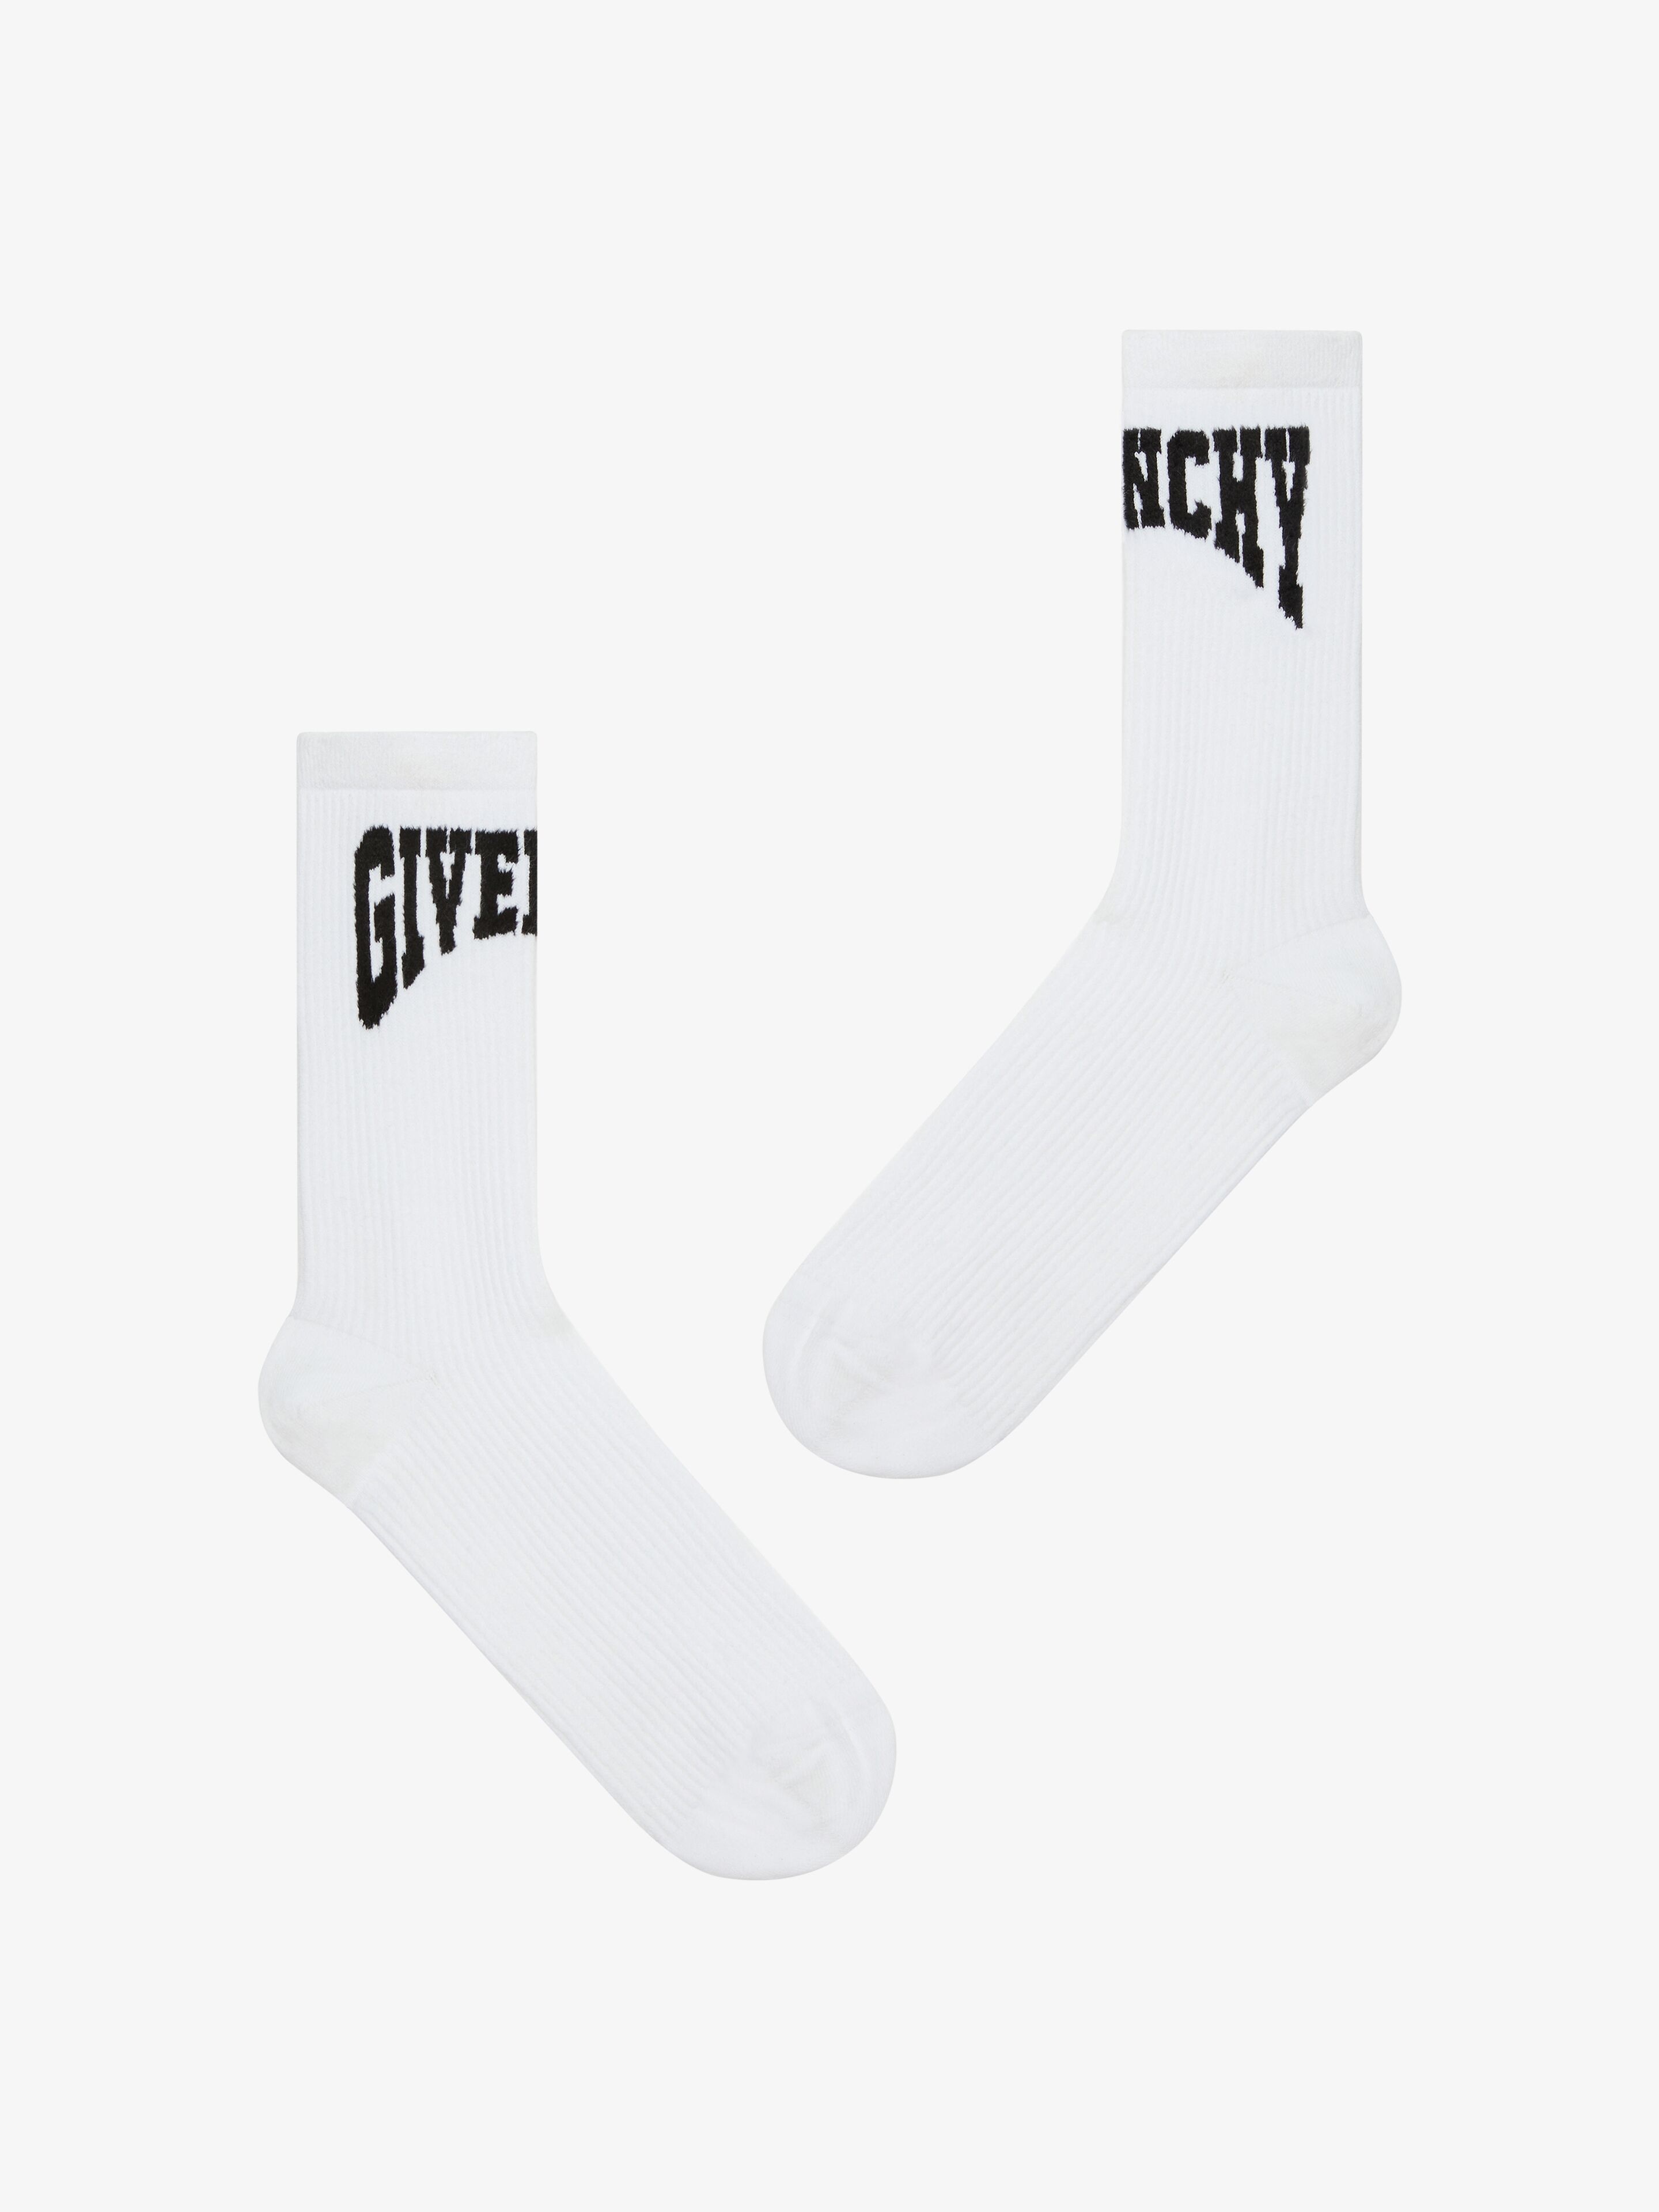 GIVENCHY CHAUSSETTES EN COTON GIVENCHY ARCHETYPE